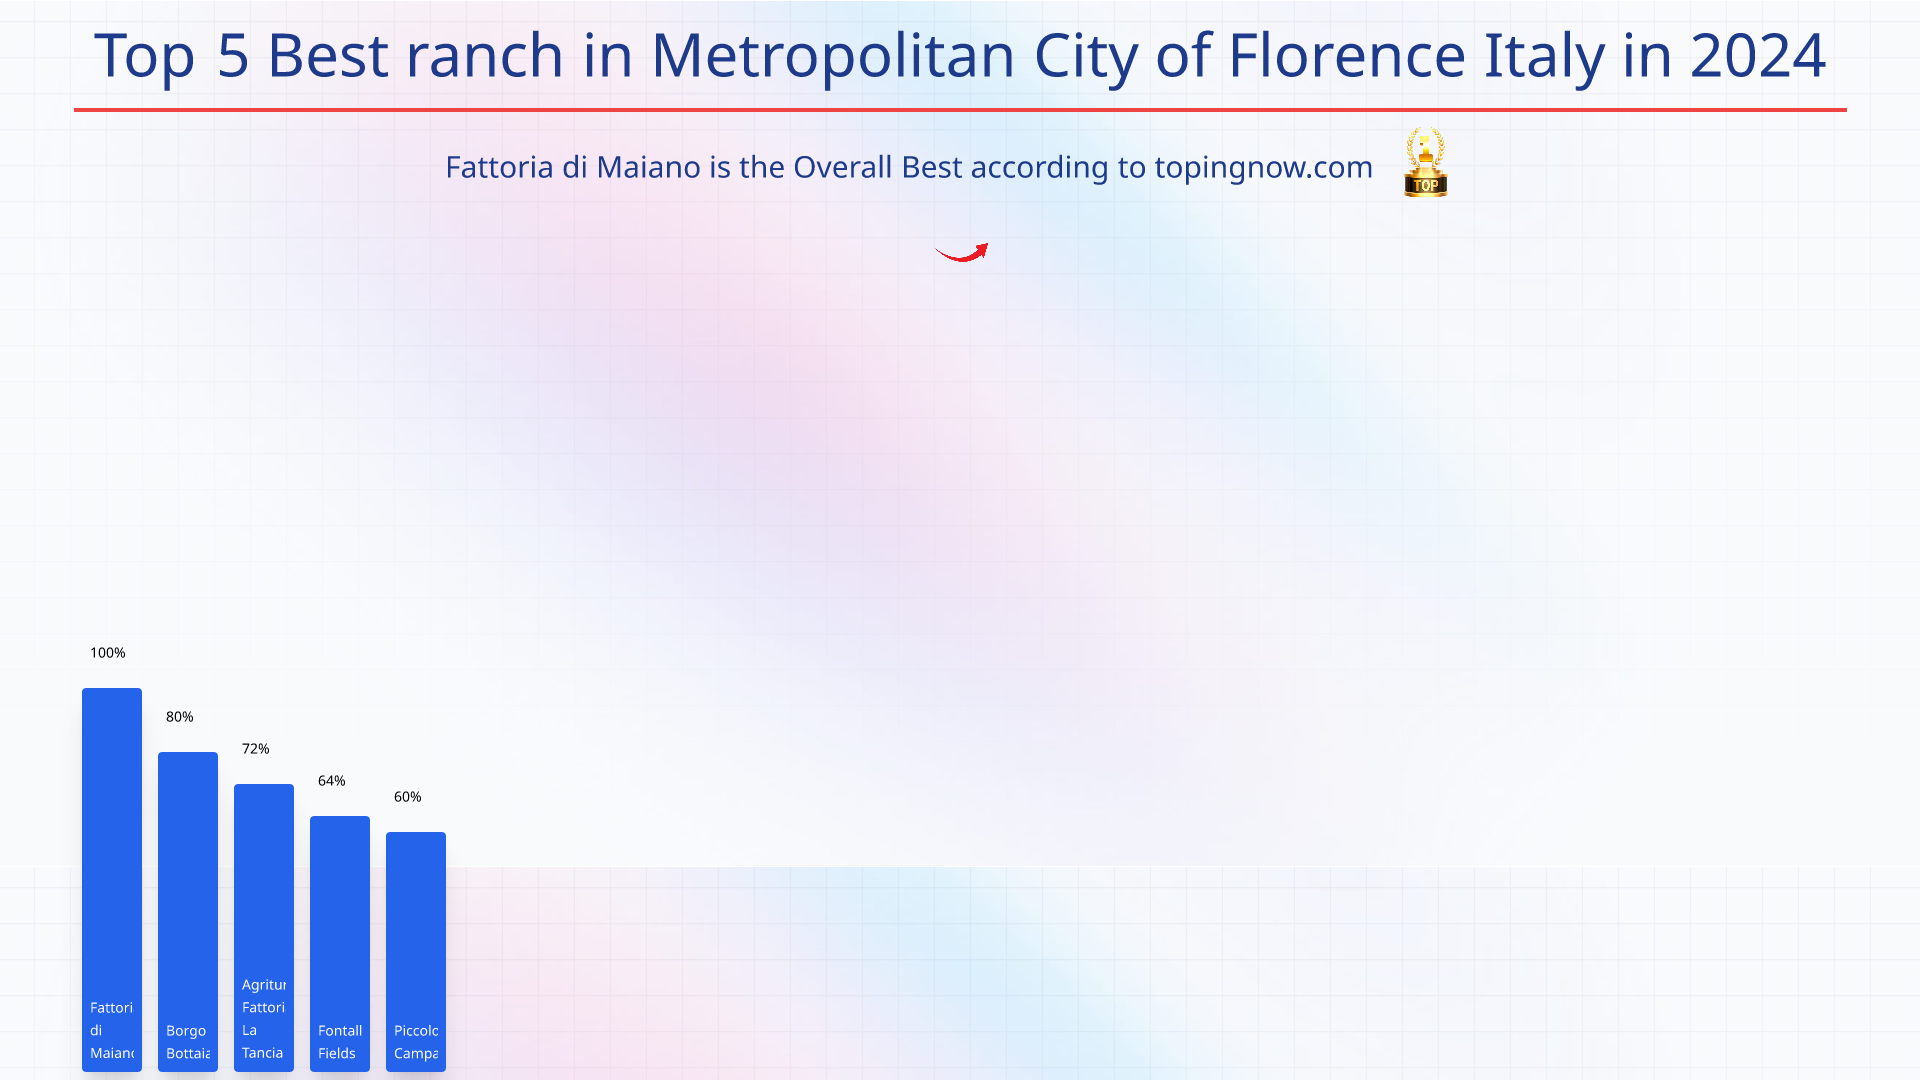 Top 5 Best ranch in Metropolitan City of Florence Italy in 2024: Top 5 Best ranch in Metropolitan City of Florence Italy in 2024